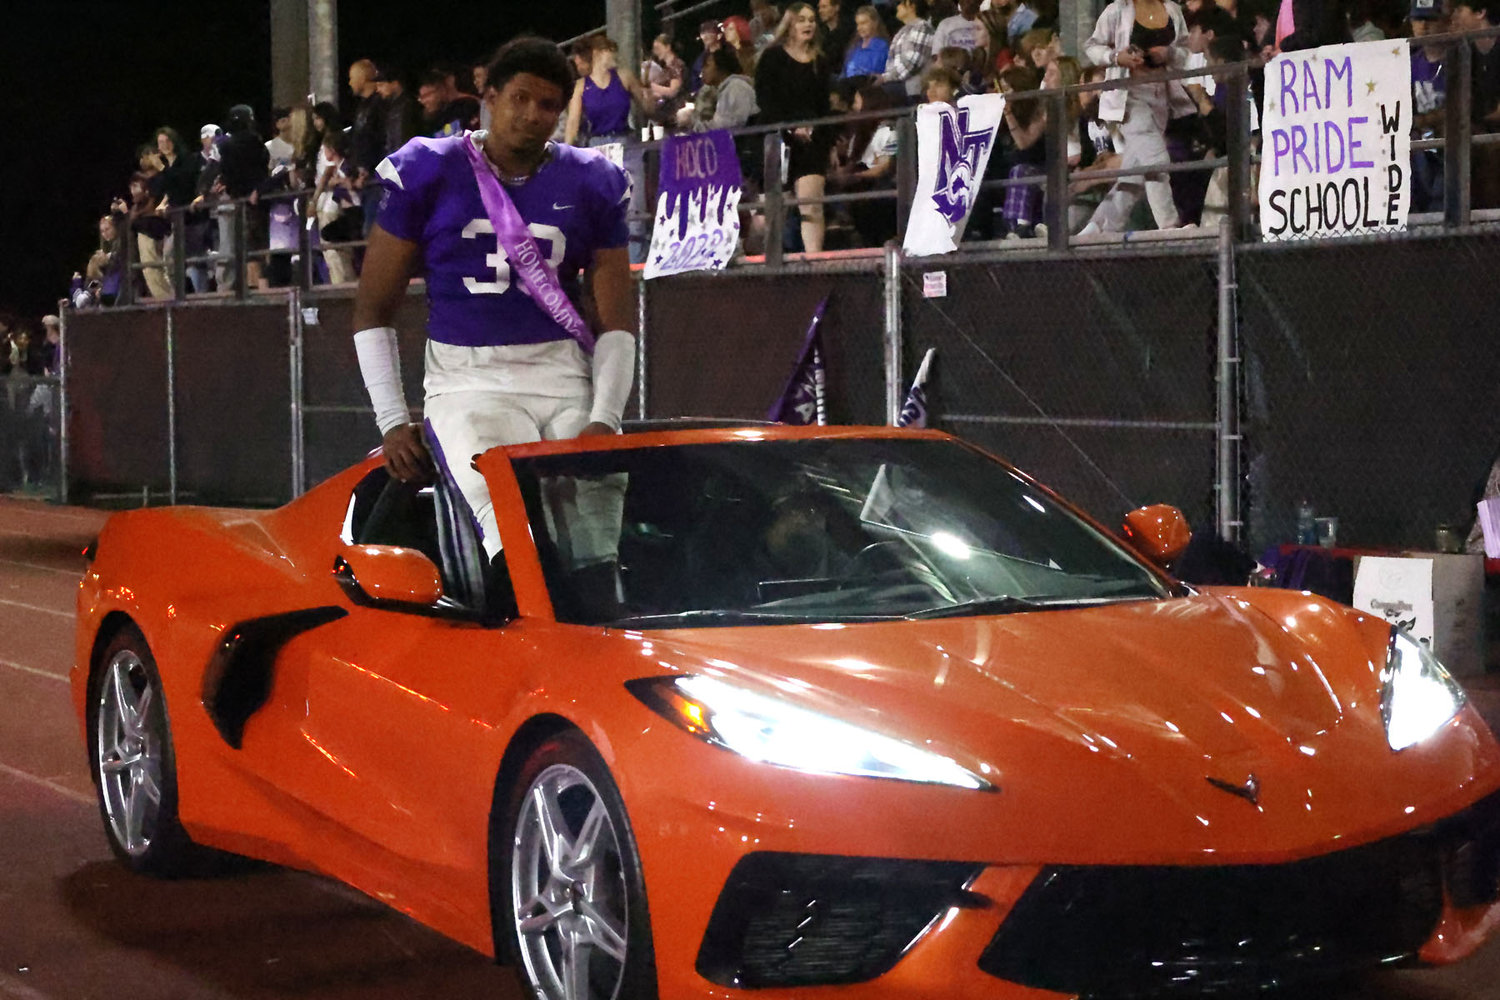 Senior and homecoming court member Julian Lee on his steed.